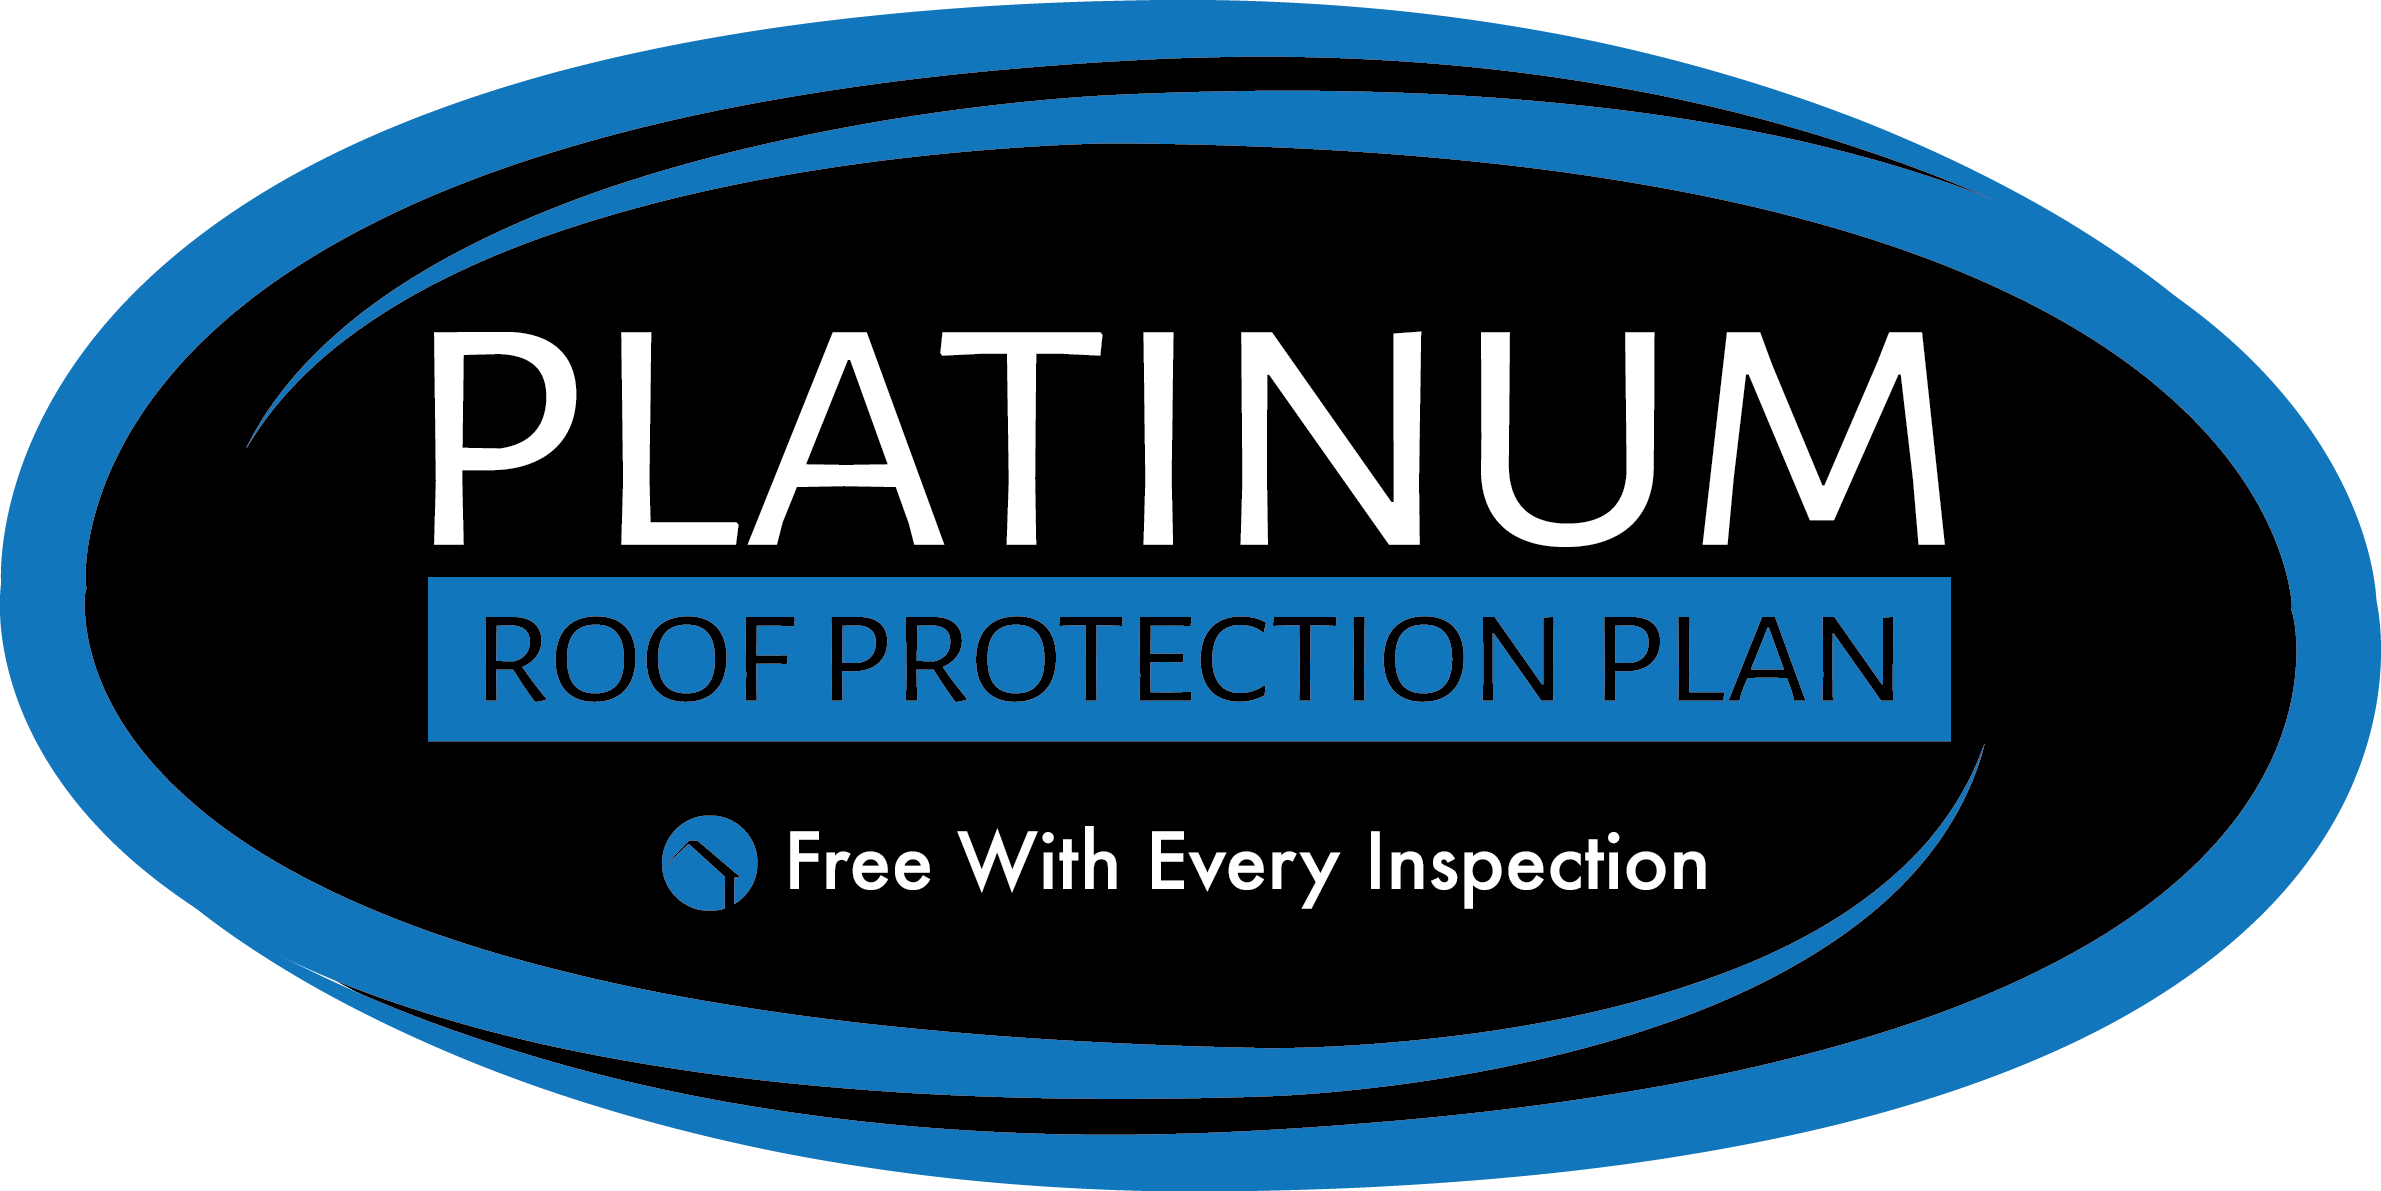 RoofProtectionPlanCertificate